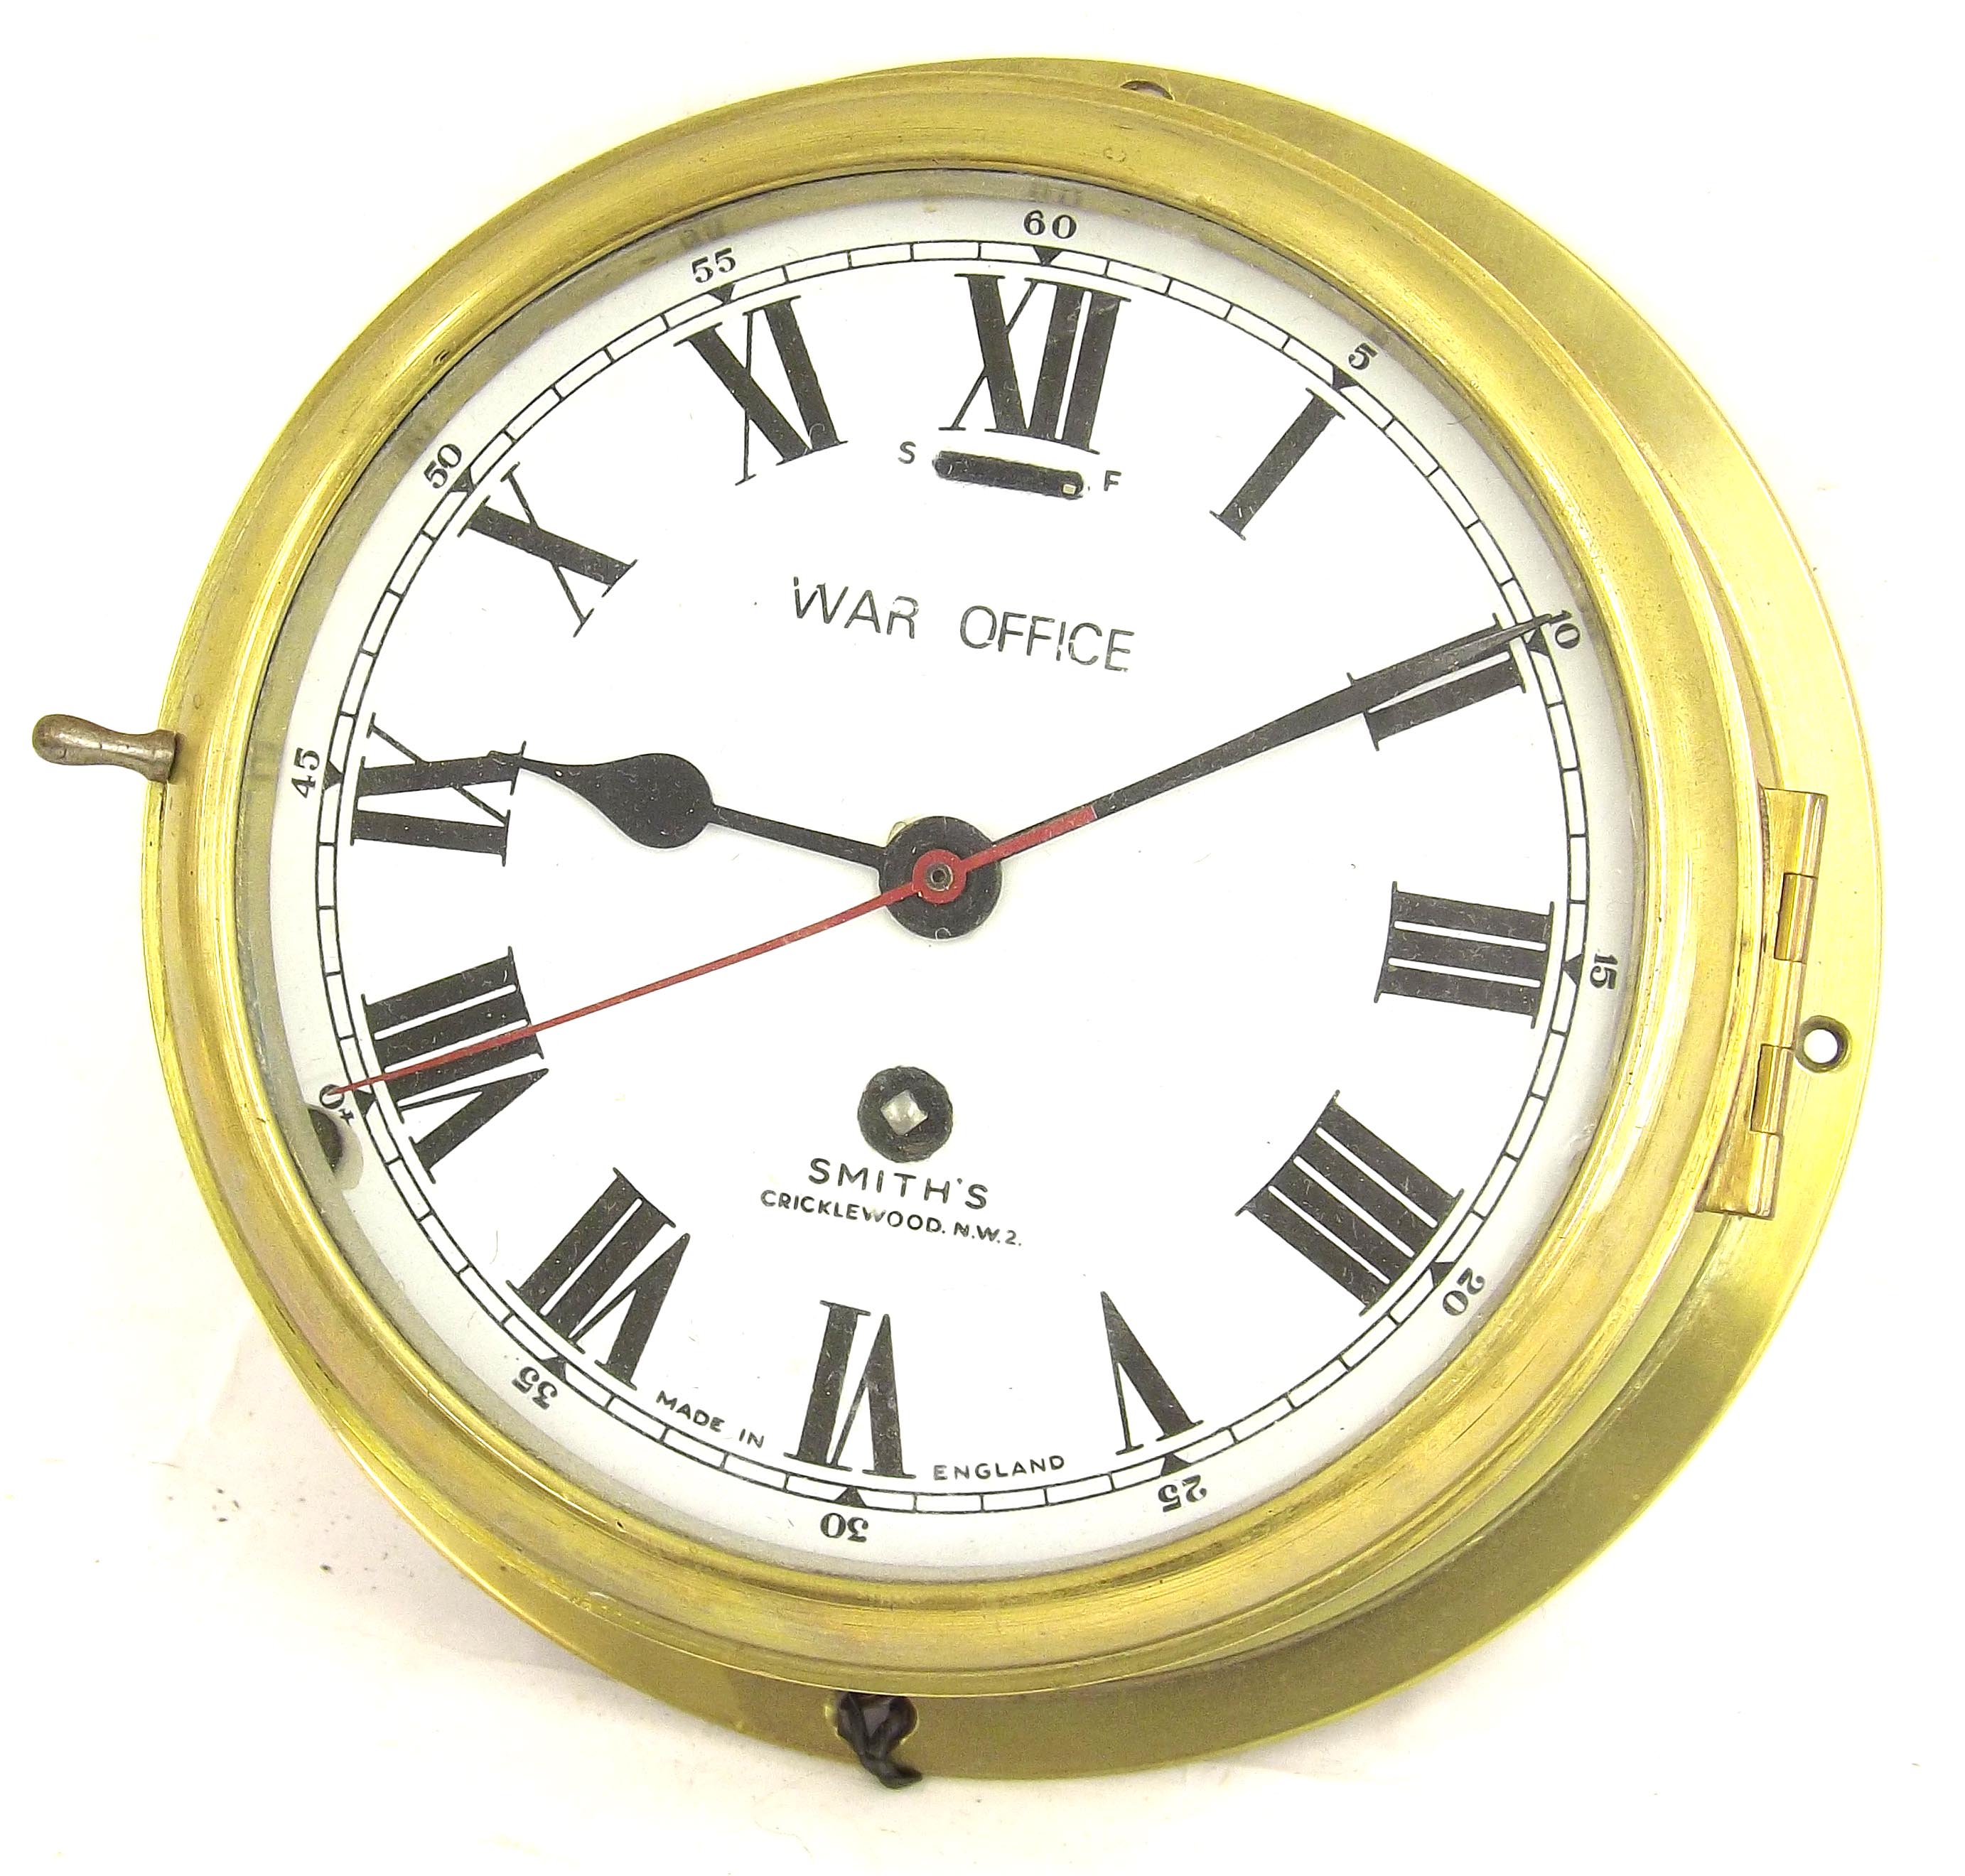 Ship`s brass bulkhead timepiece, the 6.5" dial signed War Office, Smith`s, Cricklewood, N.W.2,